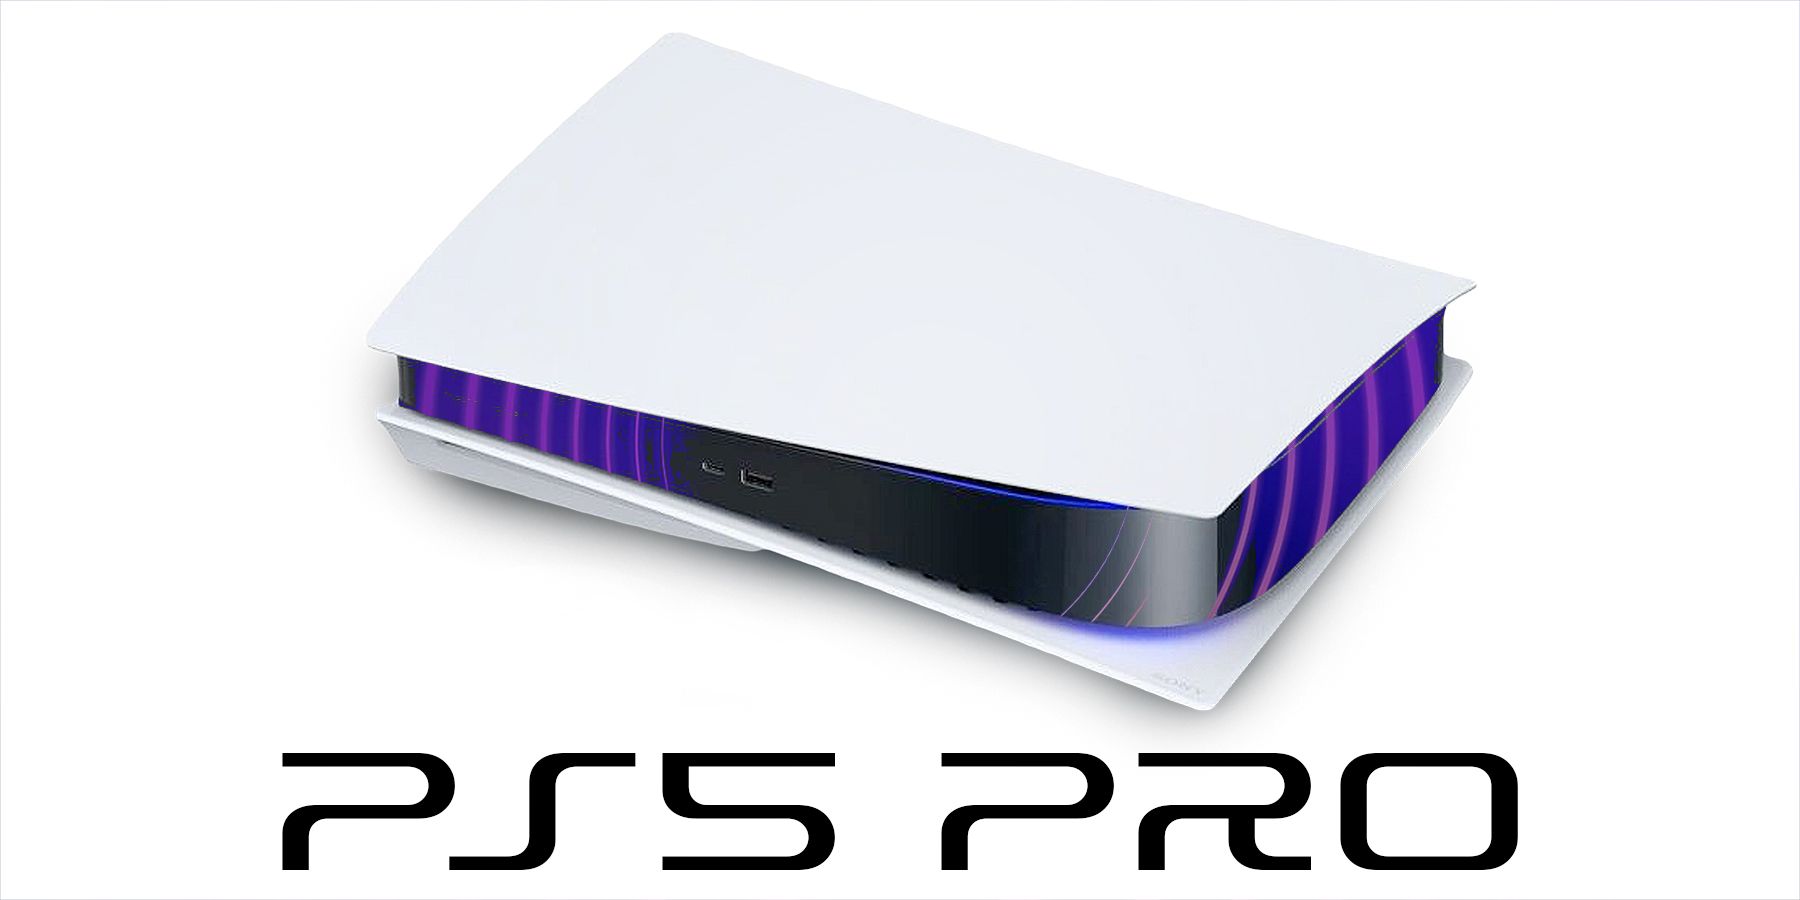 Sony PS5 Pro specs leaked: What to expect?